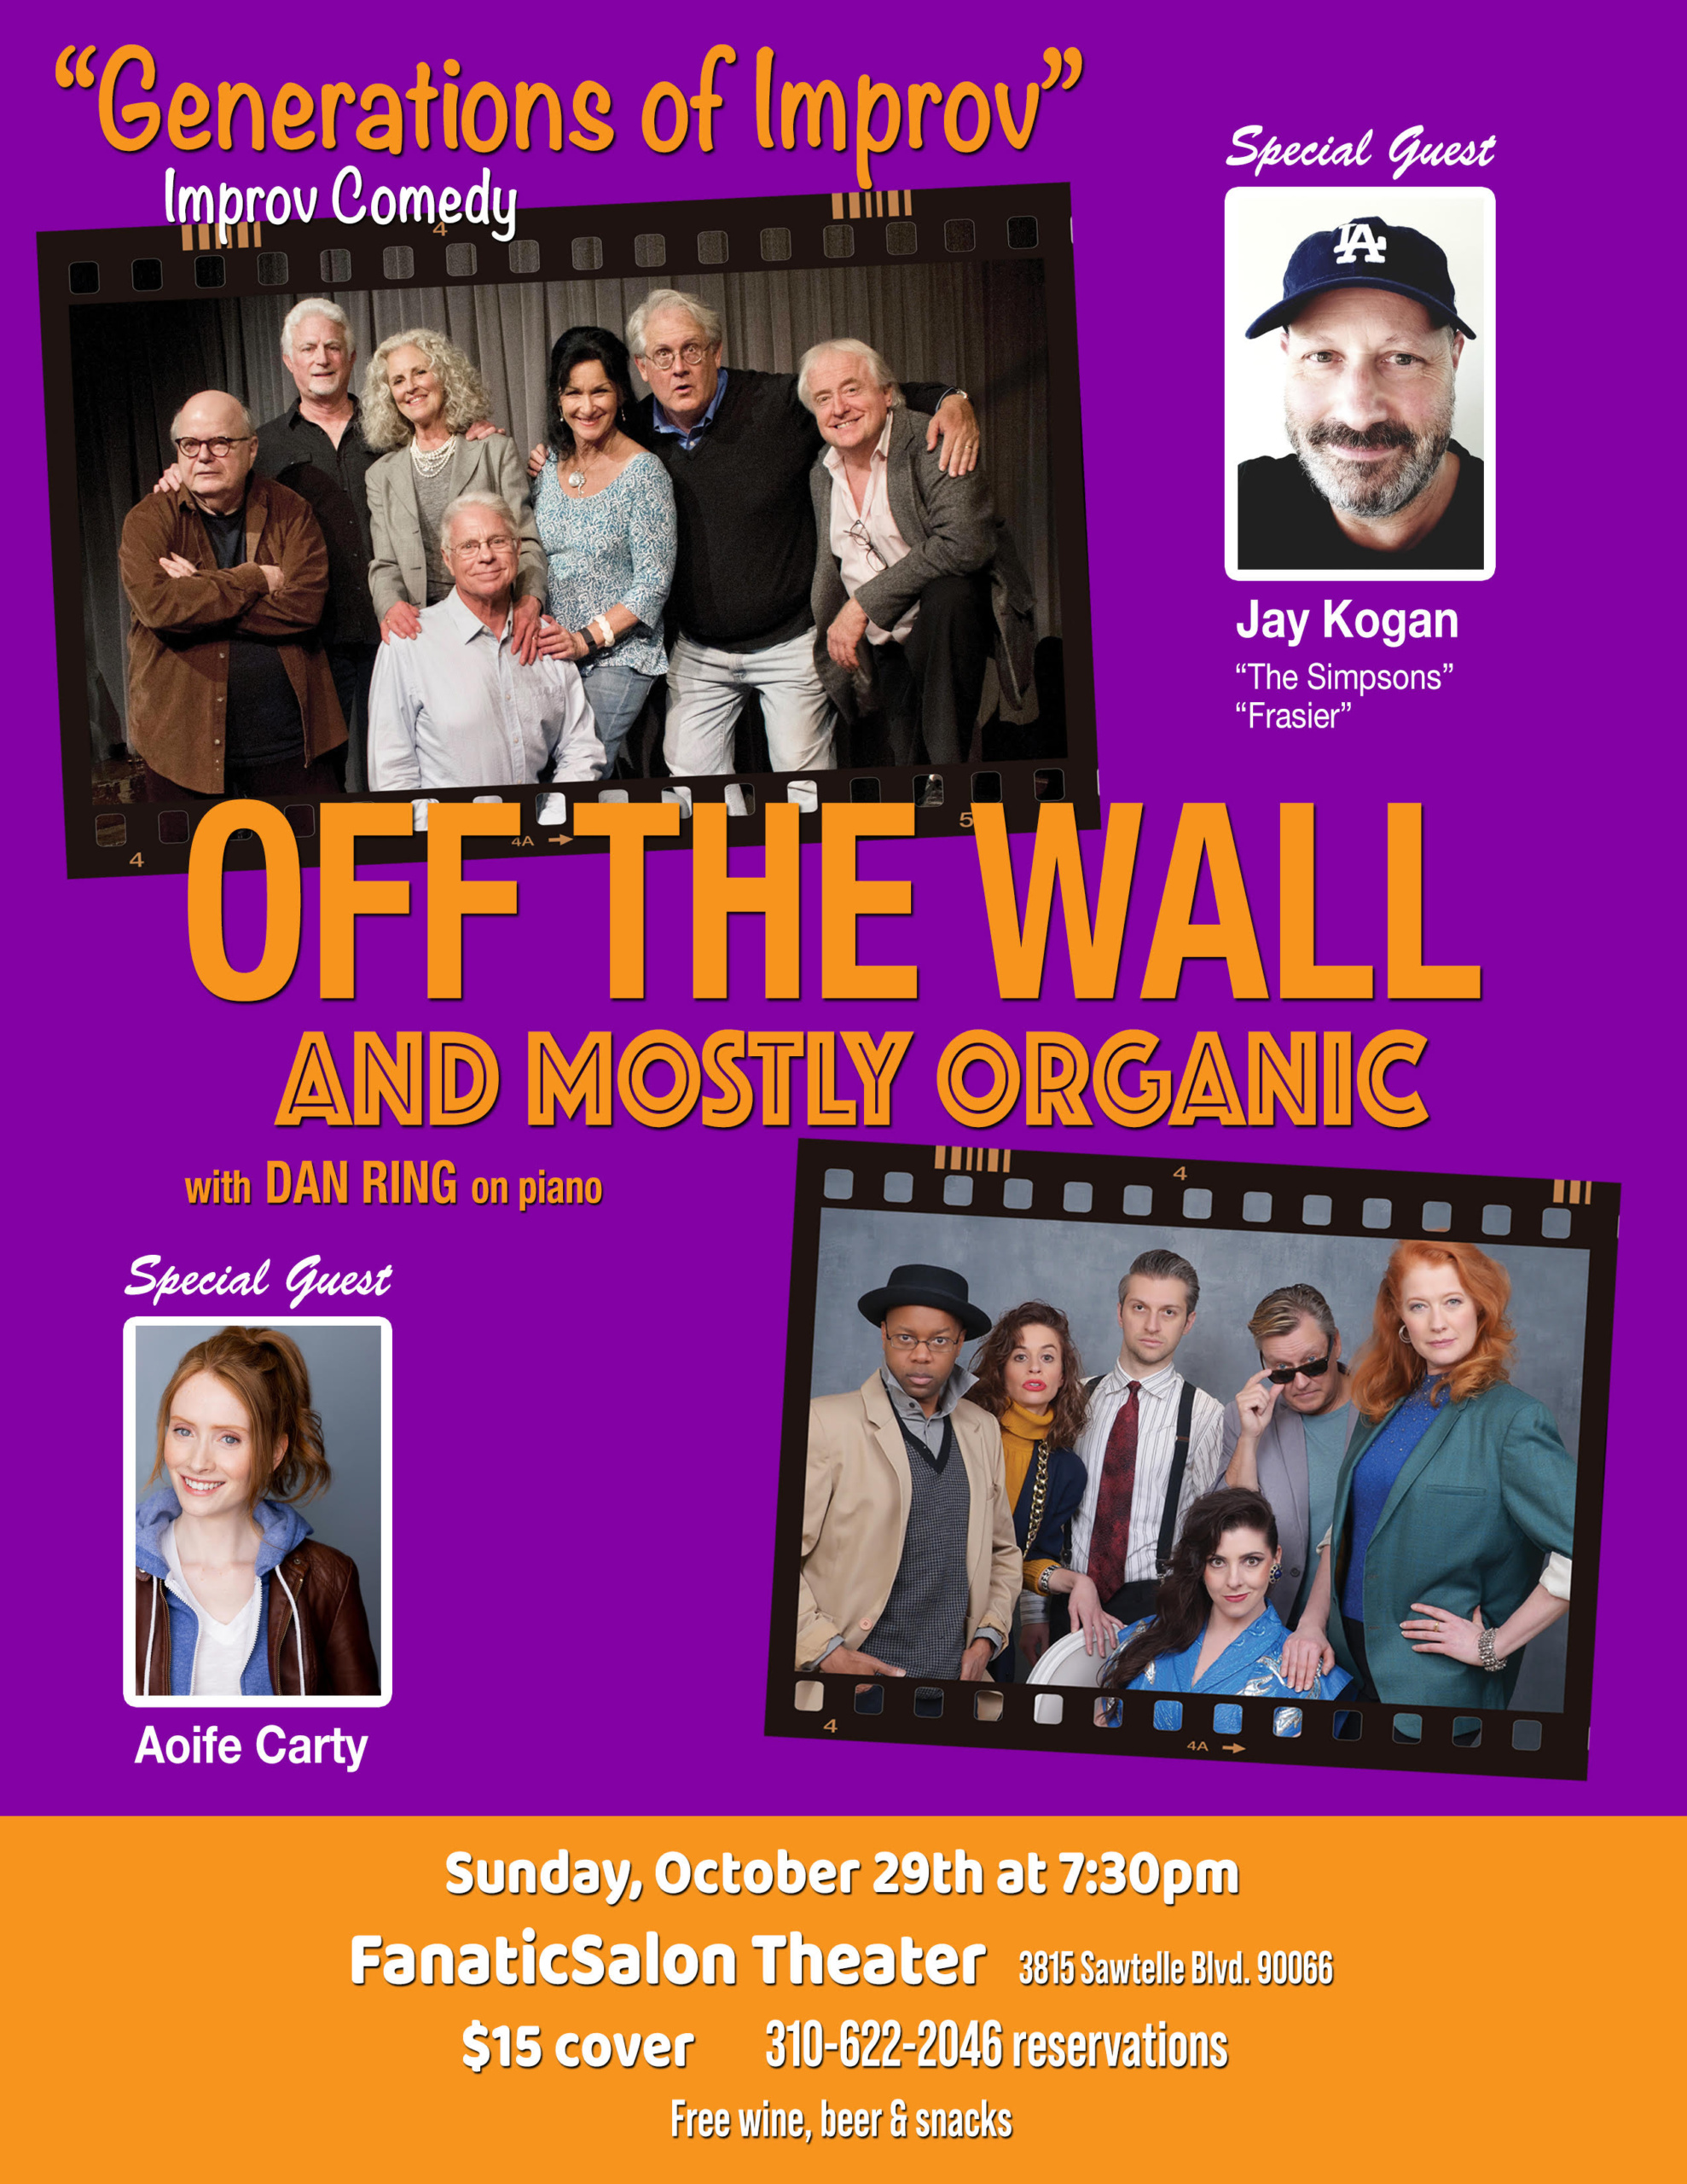 off the wall and mostly organic, culver city, improv